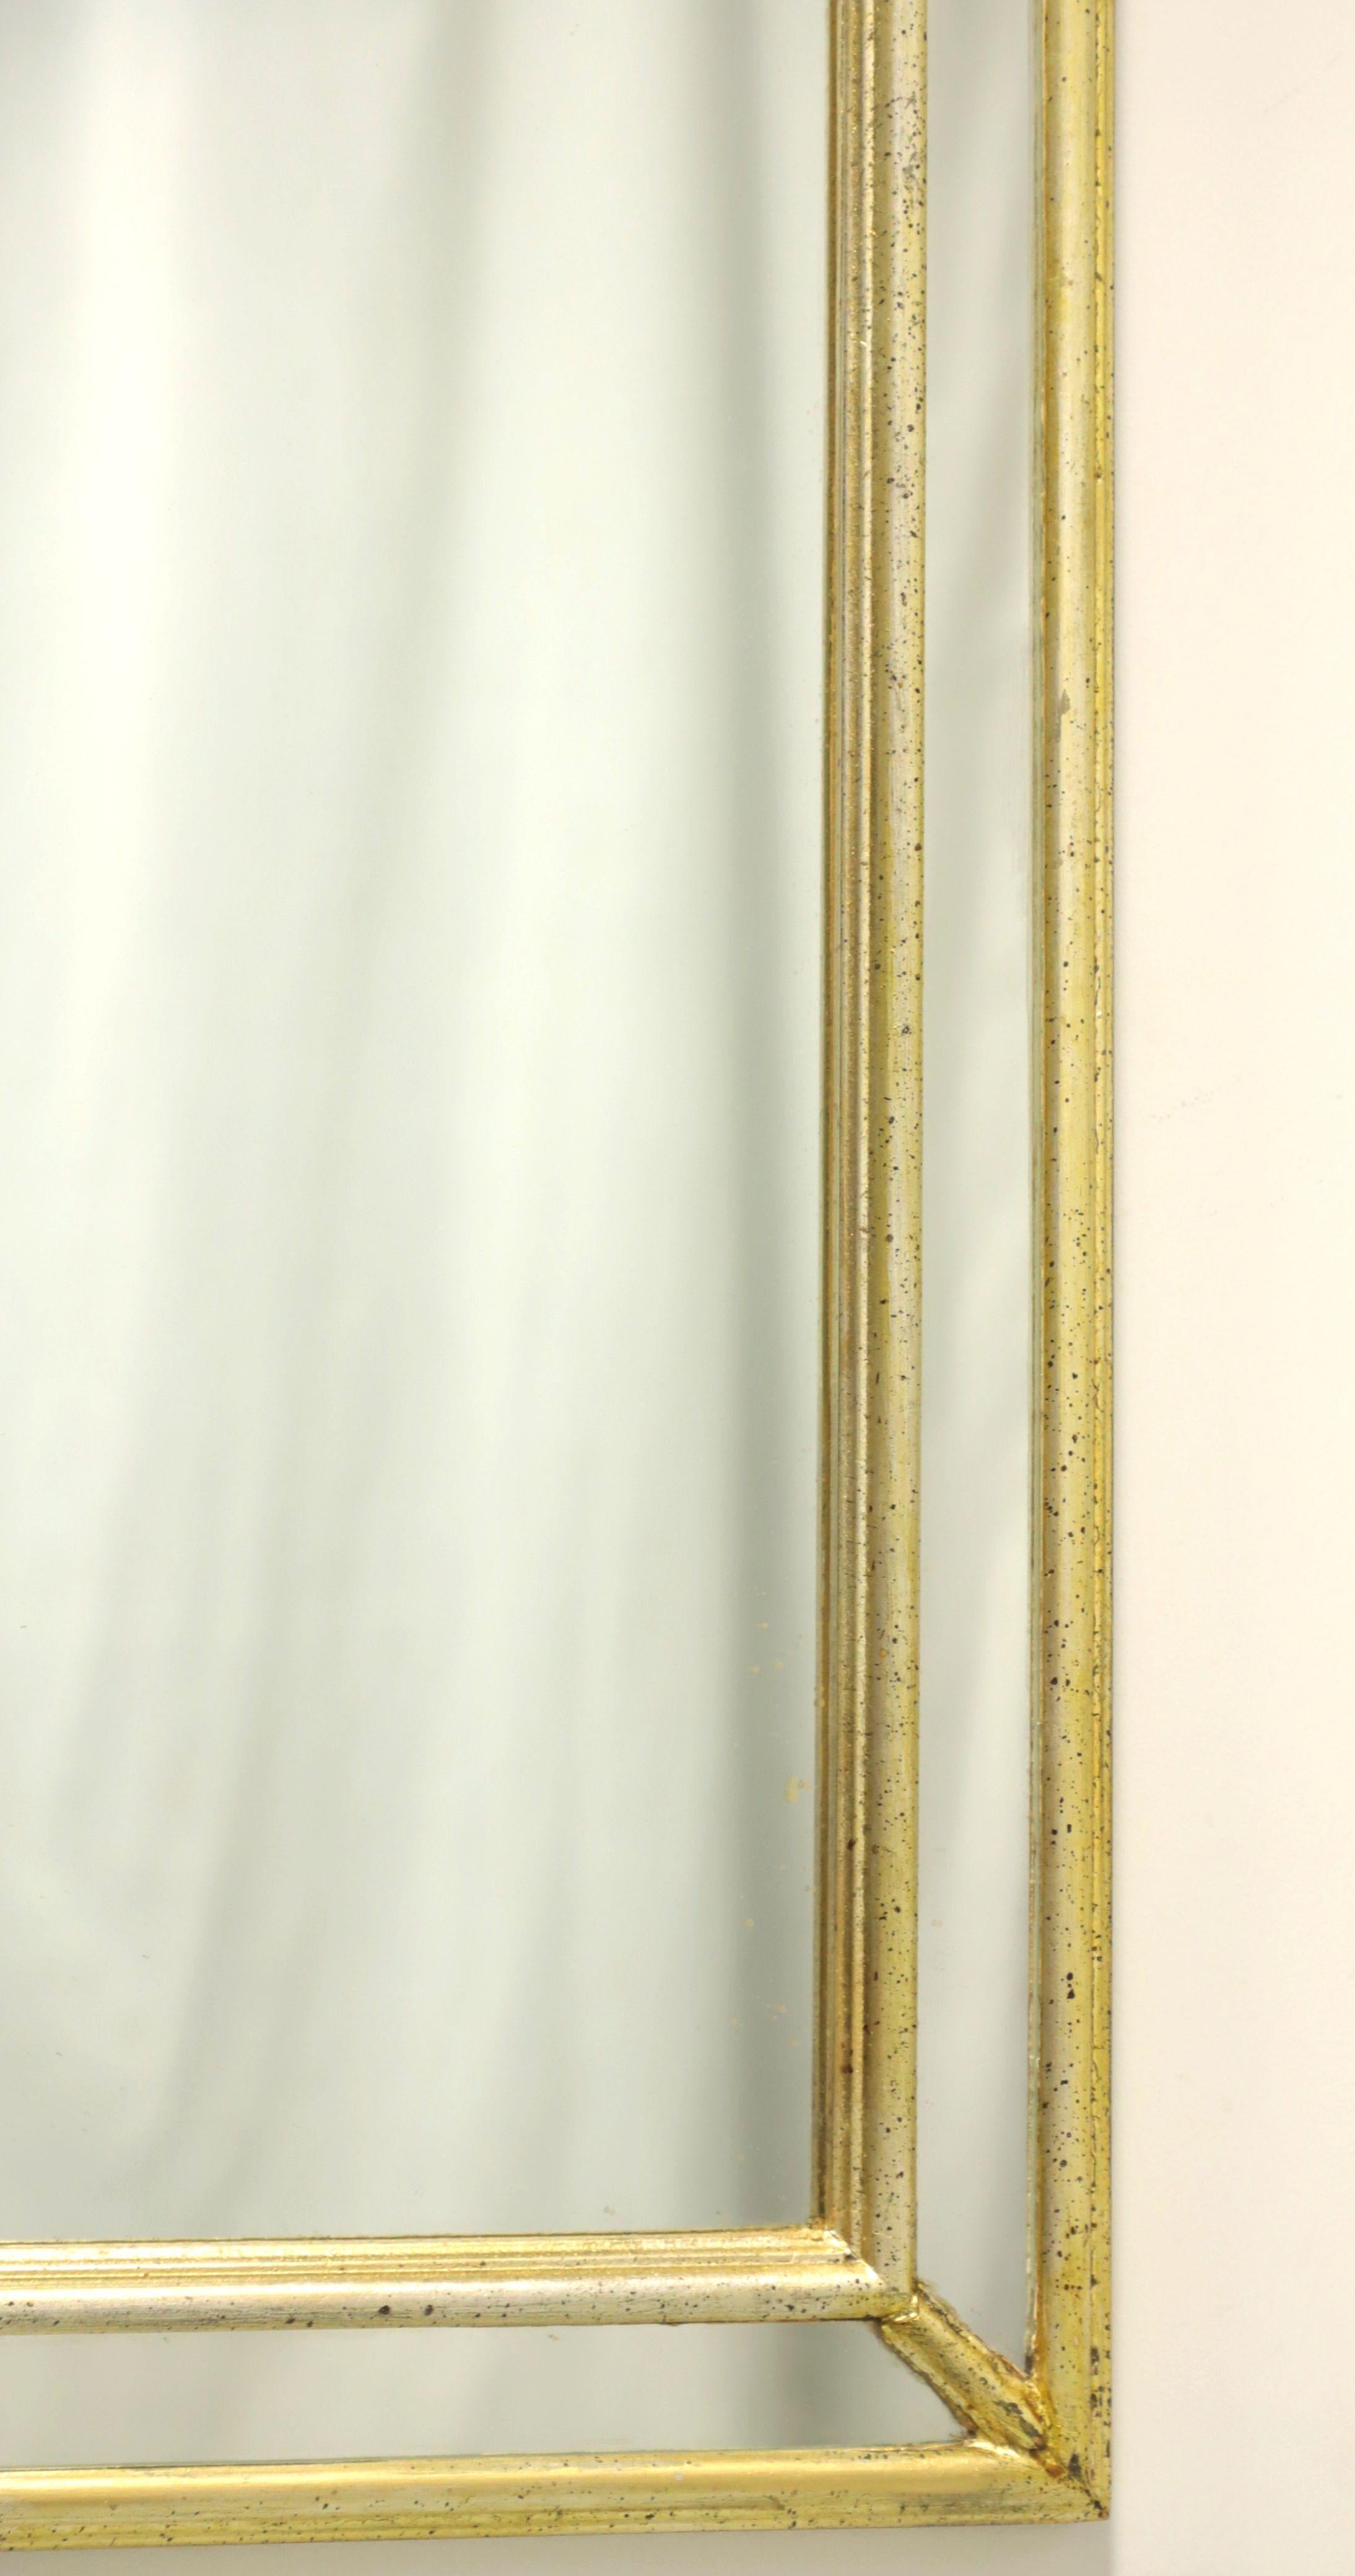 LABARGE Mid 20th Century Italian Regency Style Parclose Wall Mirror For Sale 2